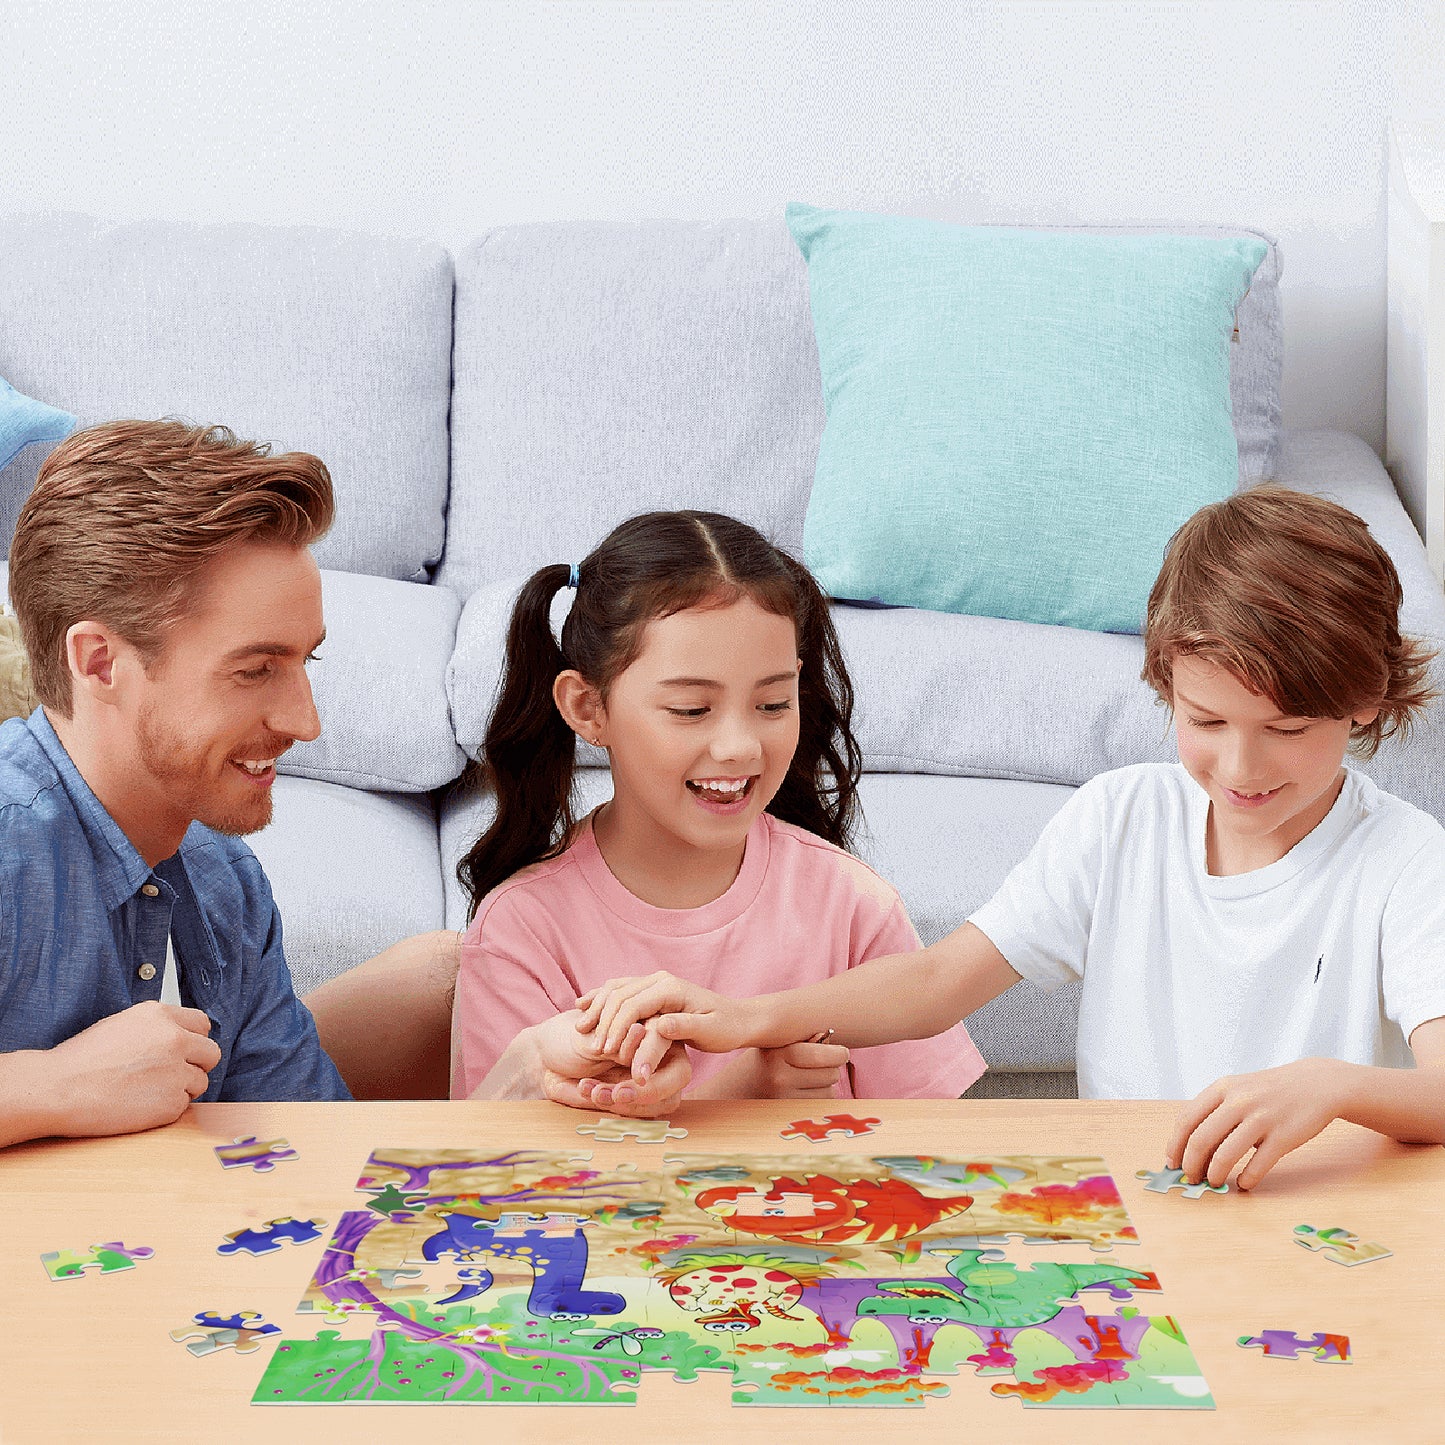 MISITU Jigsaw Puzzles for Children Cartoon Dinosaurs 100 Pieces Puzzles 18 x 14 Inches